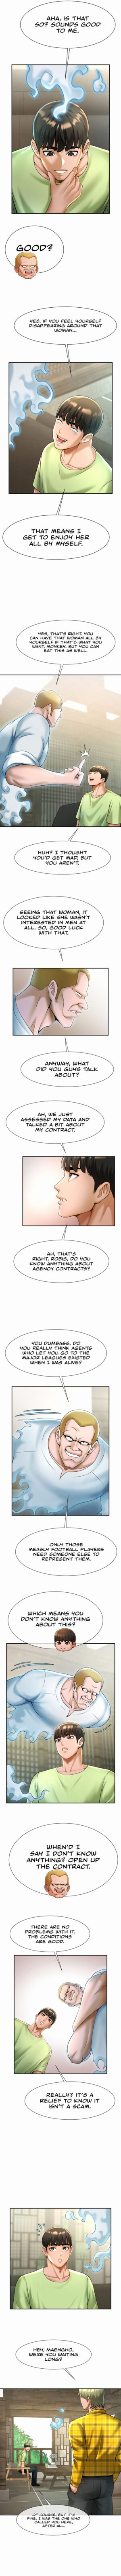 [Epiphany, Red Tissue] The Cheat Code Hitter Fucks Them All (1-19) [English] [Omega Scans] [Ongoing]